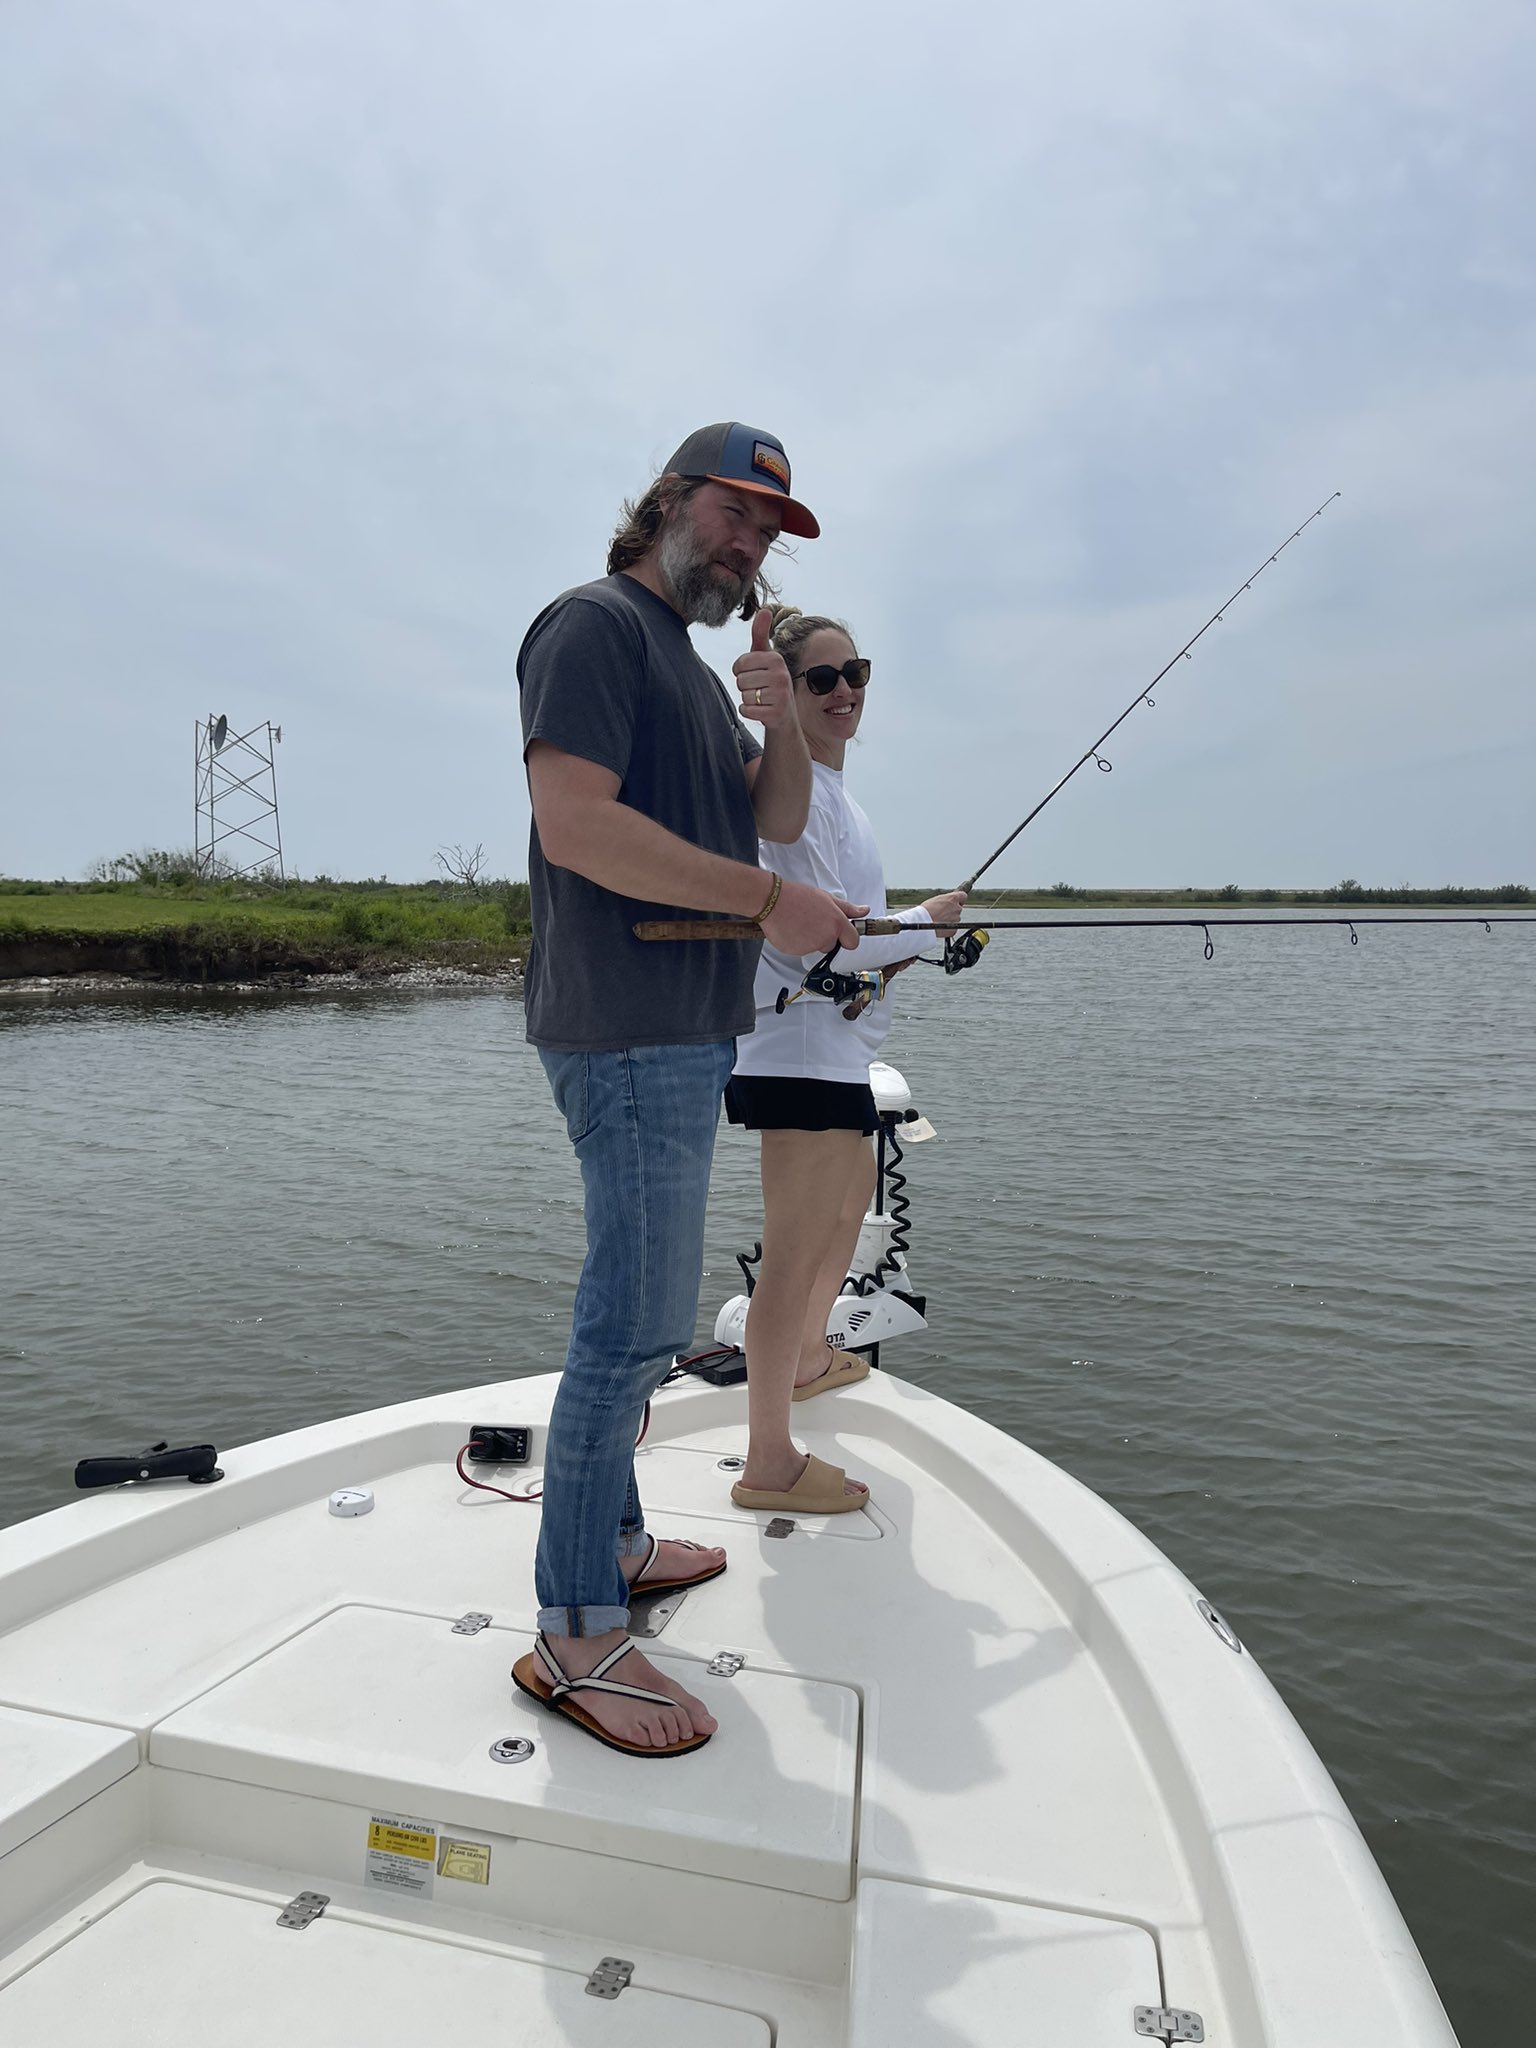 Luke on X: My wife will grab a live shrimp with her bare hands